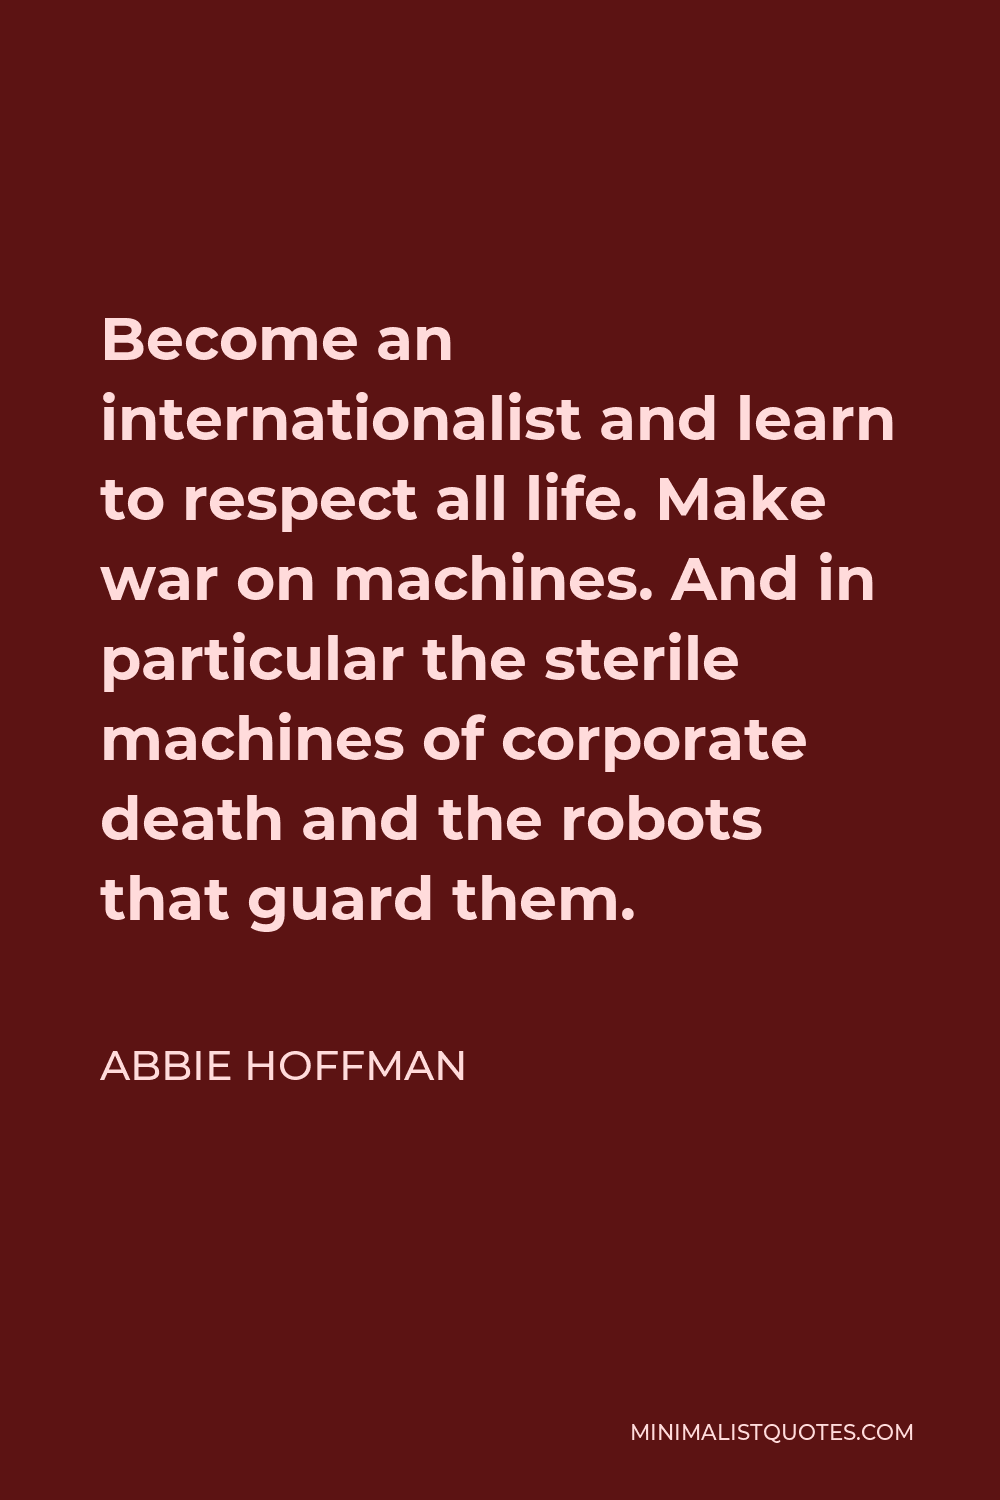 Abbie Hoffman Quote - Become an internationalist and learn to respect all life. Make war on machines. And in particular the sterile machines of corporate death and the robots that guard them.